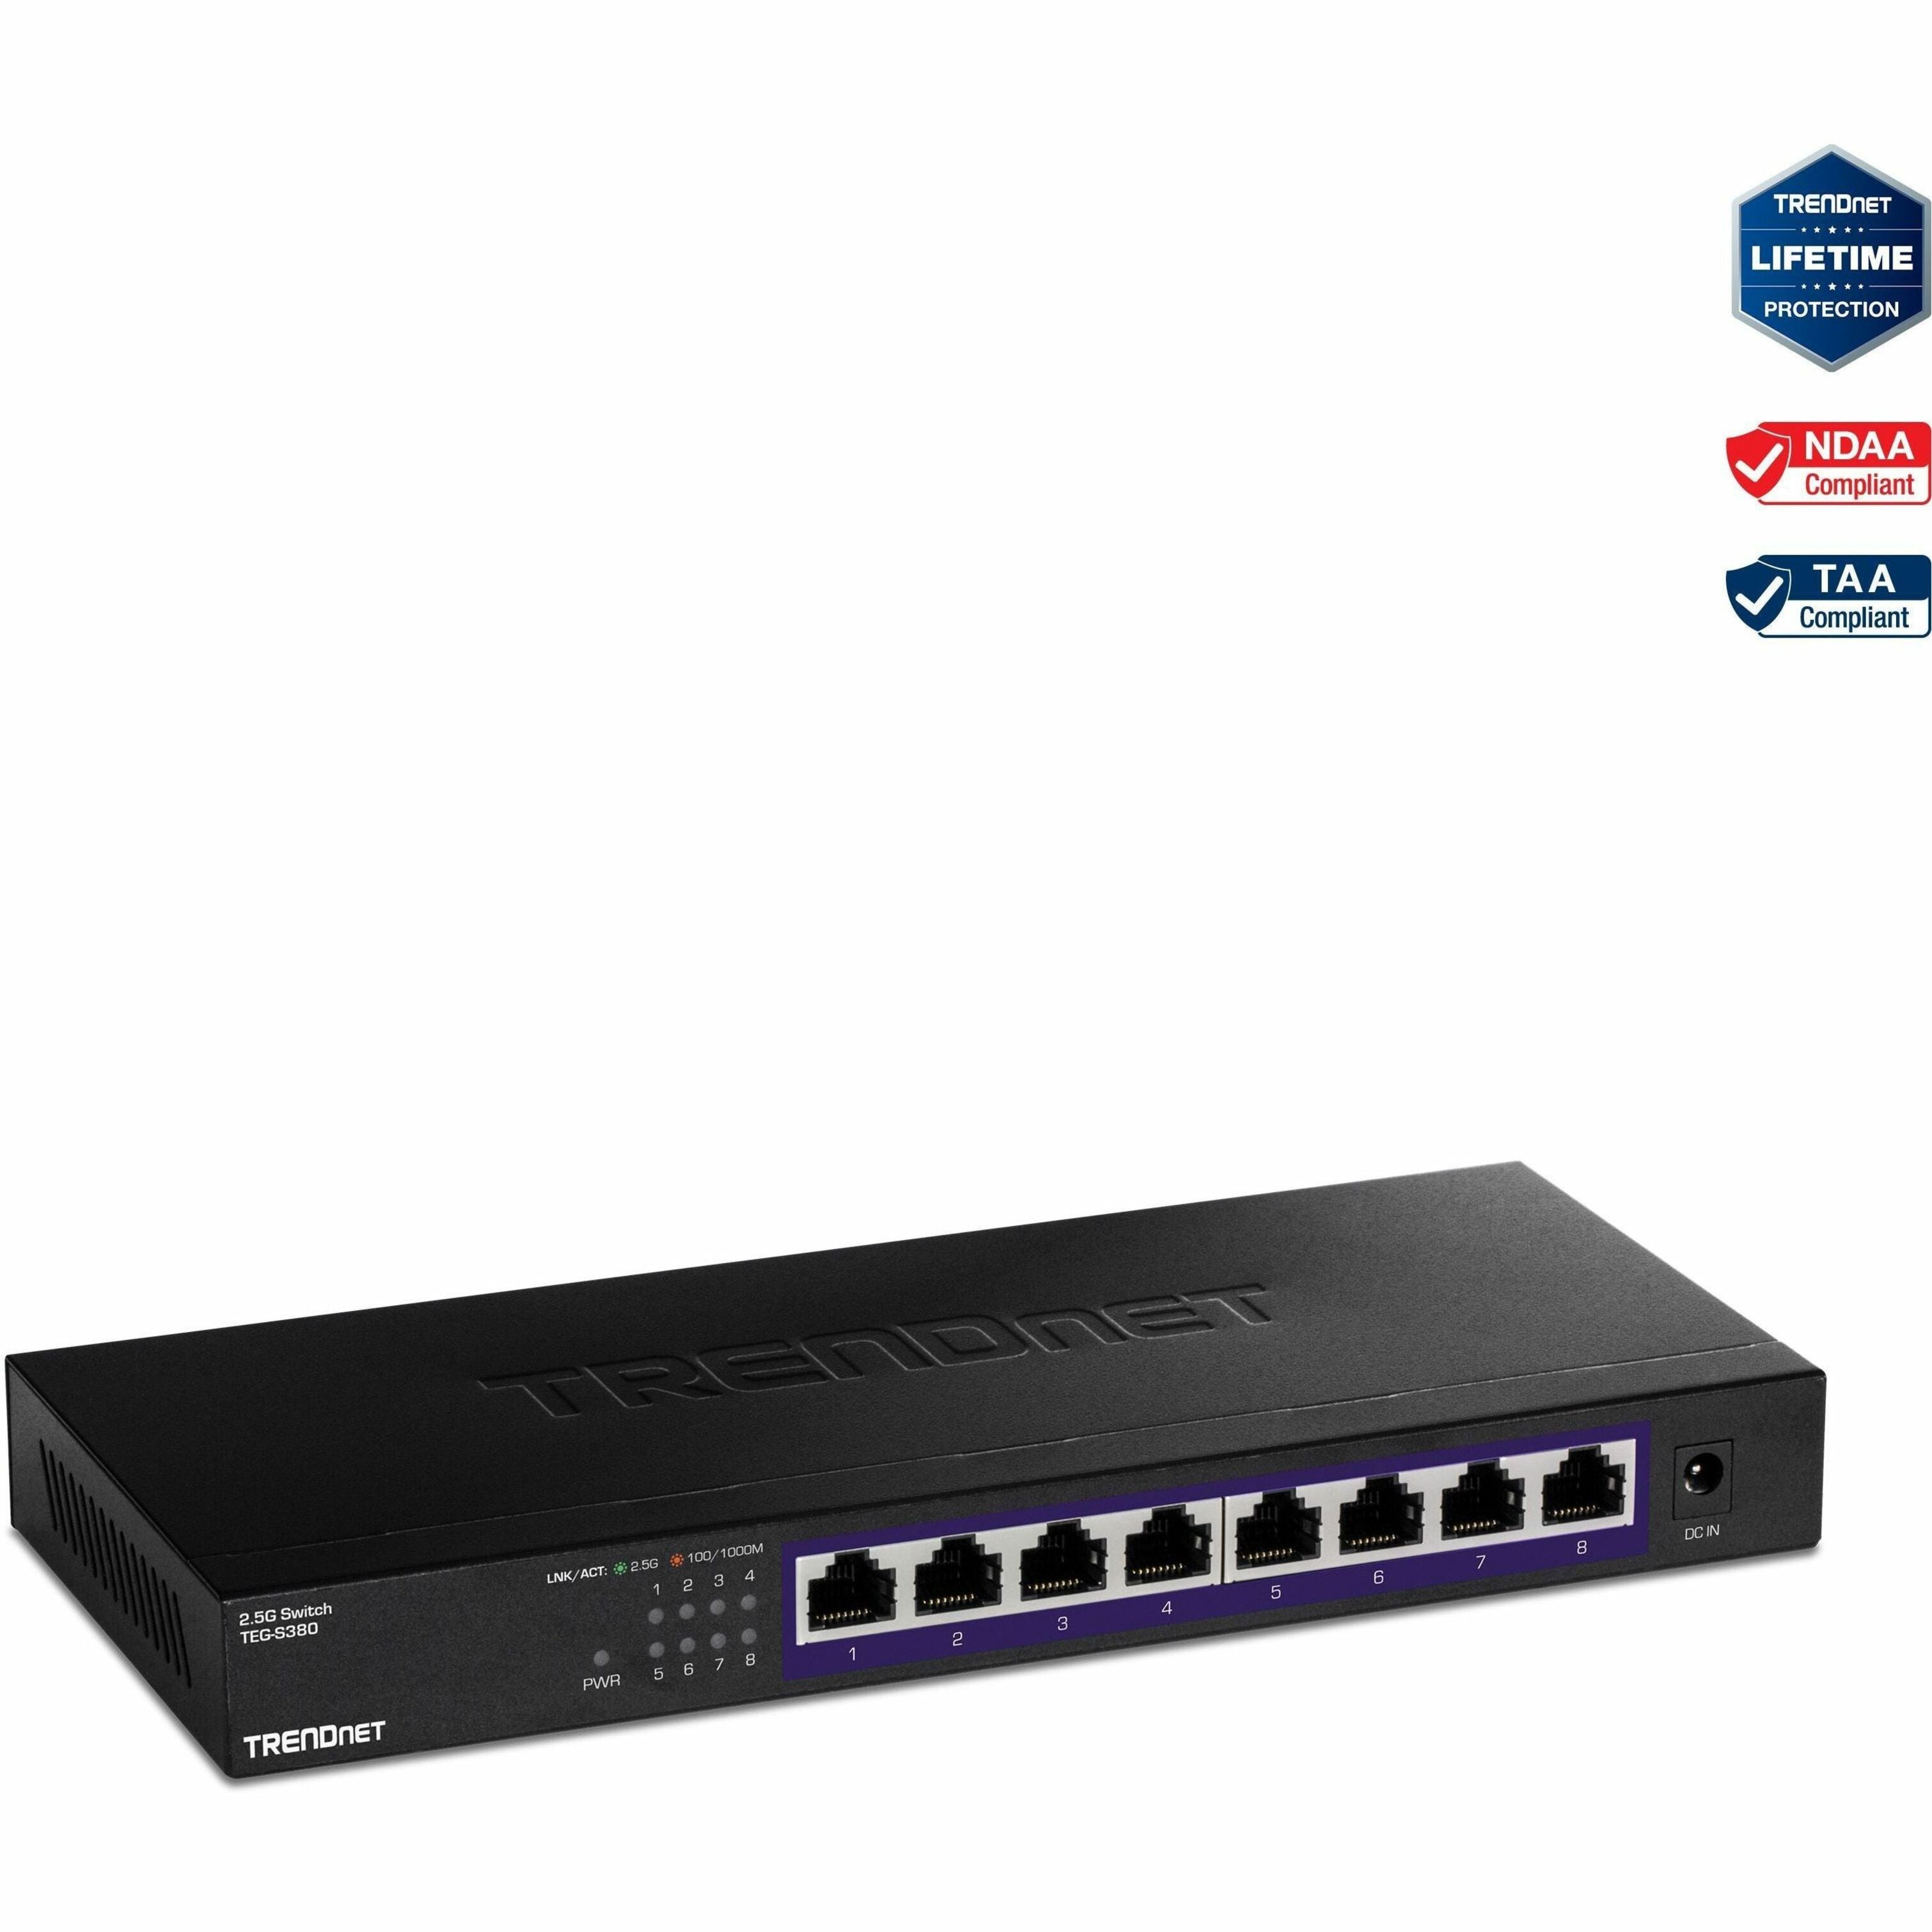 TRENDnet TEG-S380 8-Port Unmanaged 2.5G Switch, 8 x 2.5GBASE-T Ports, 40Gbps Switching Capacity, Backwards Compatible with 10-100-1000Mbps Devices